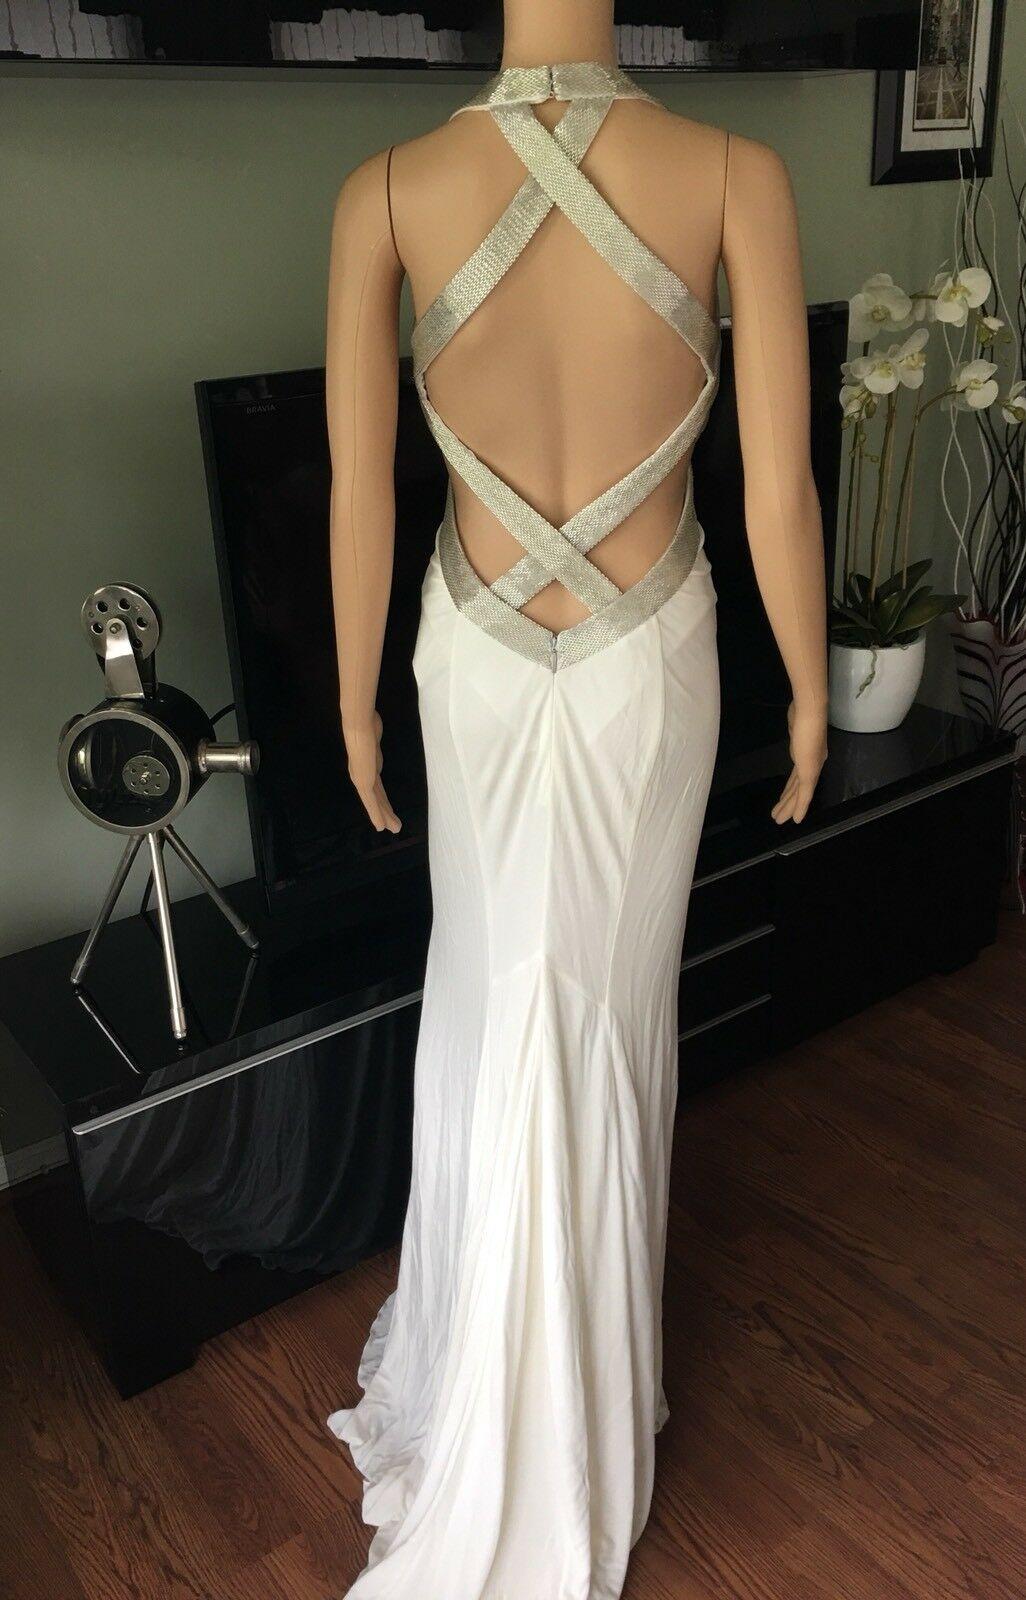 Roberto Cavalli Embellished Plunged Décolleté Open Back White Evening Dress Gown In Good Condition For Sale In Naples, FL